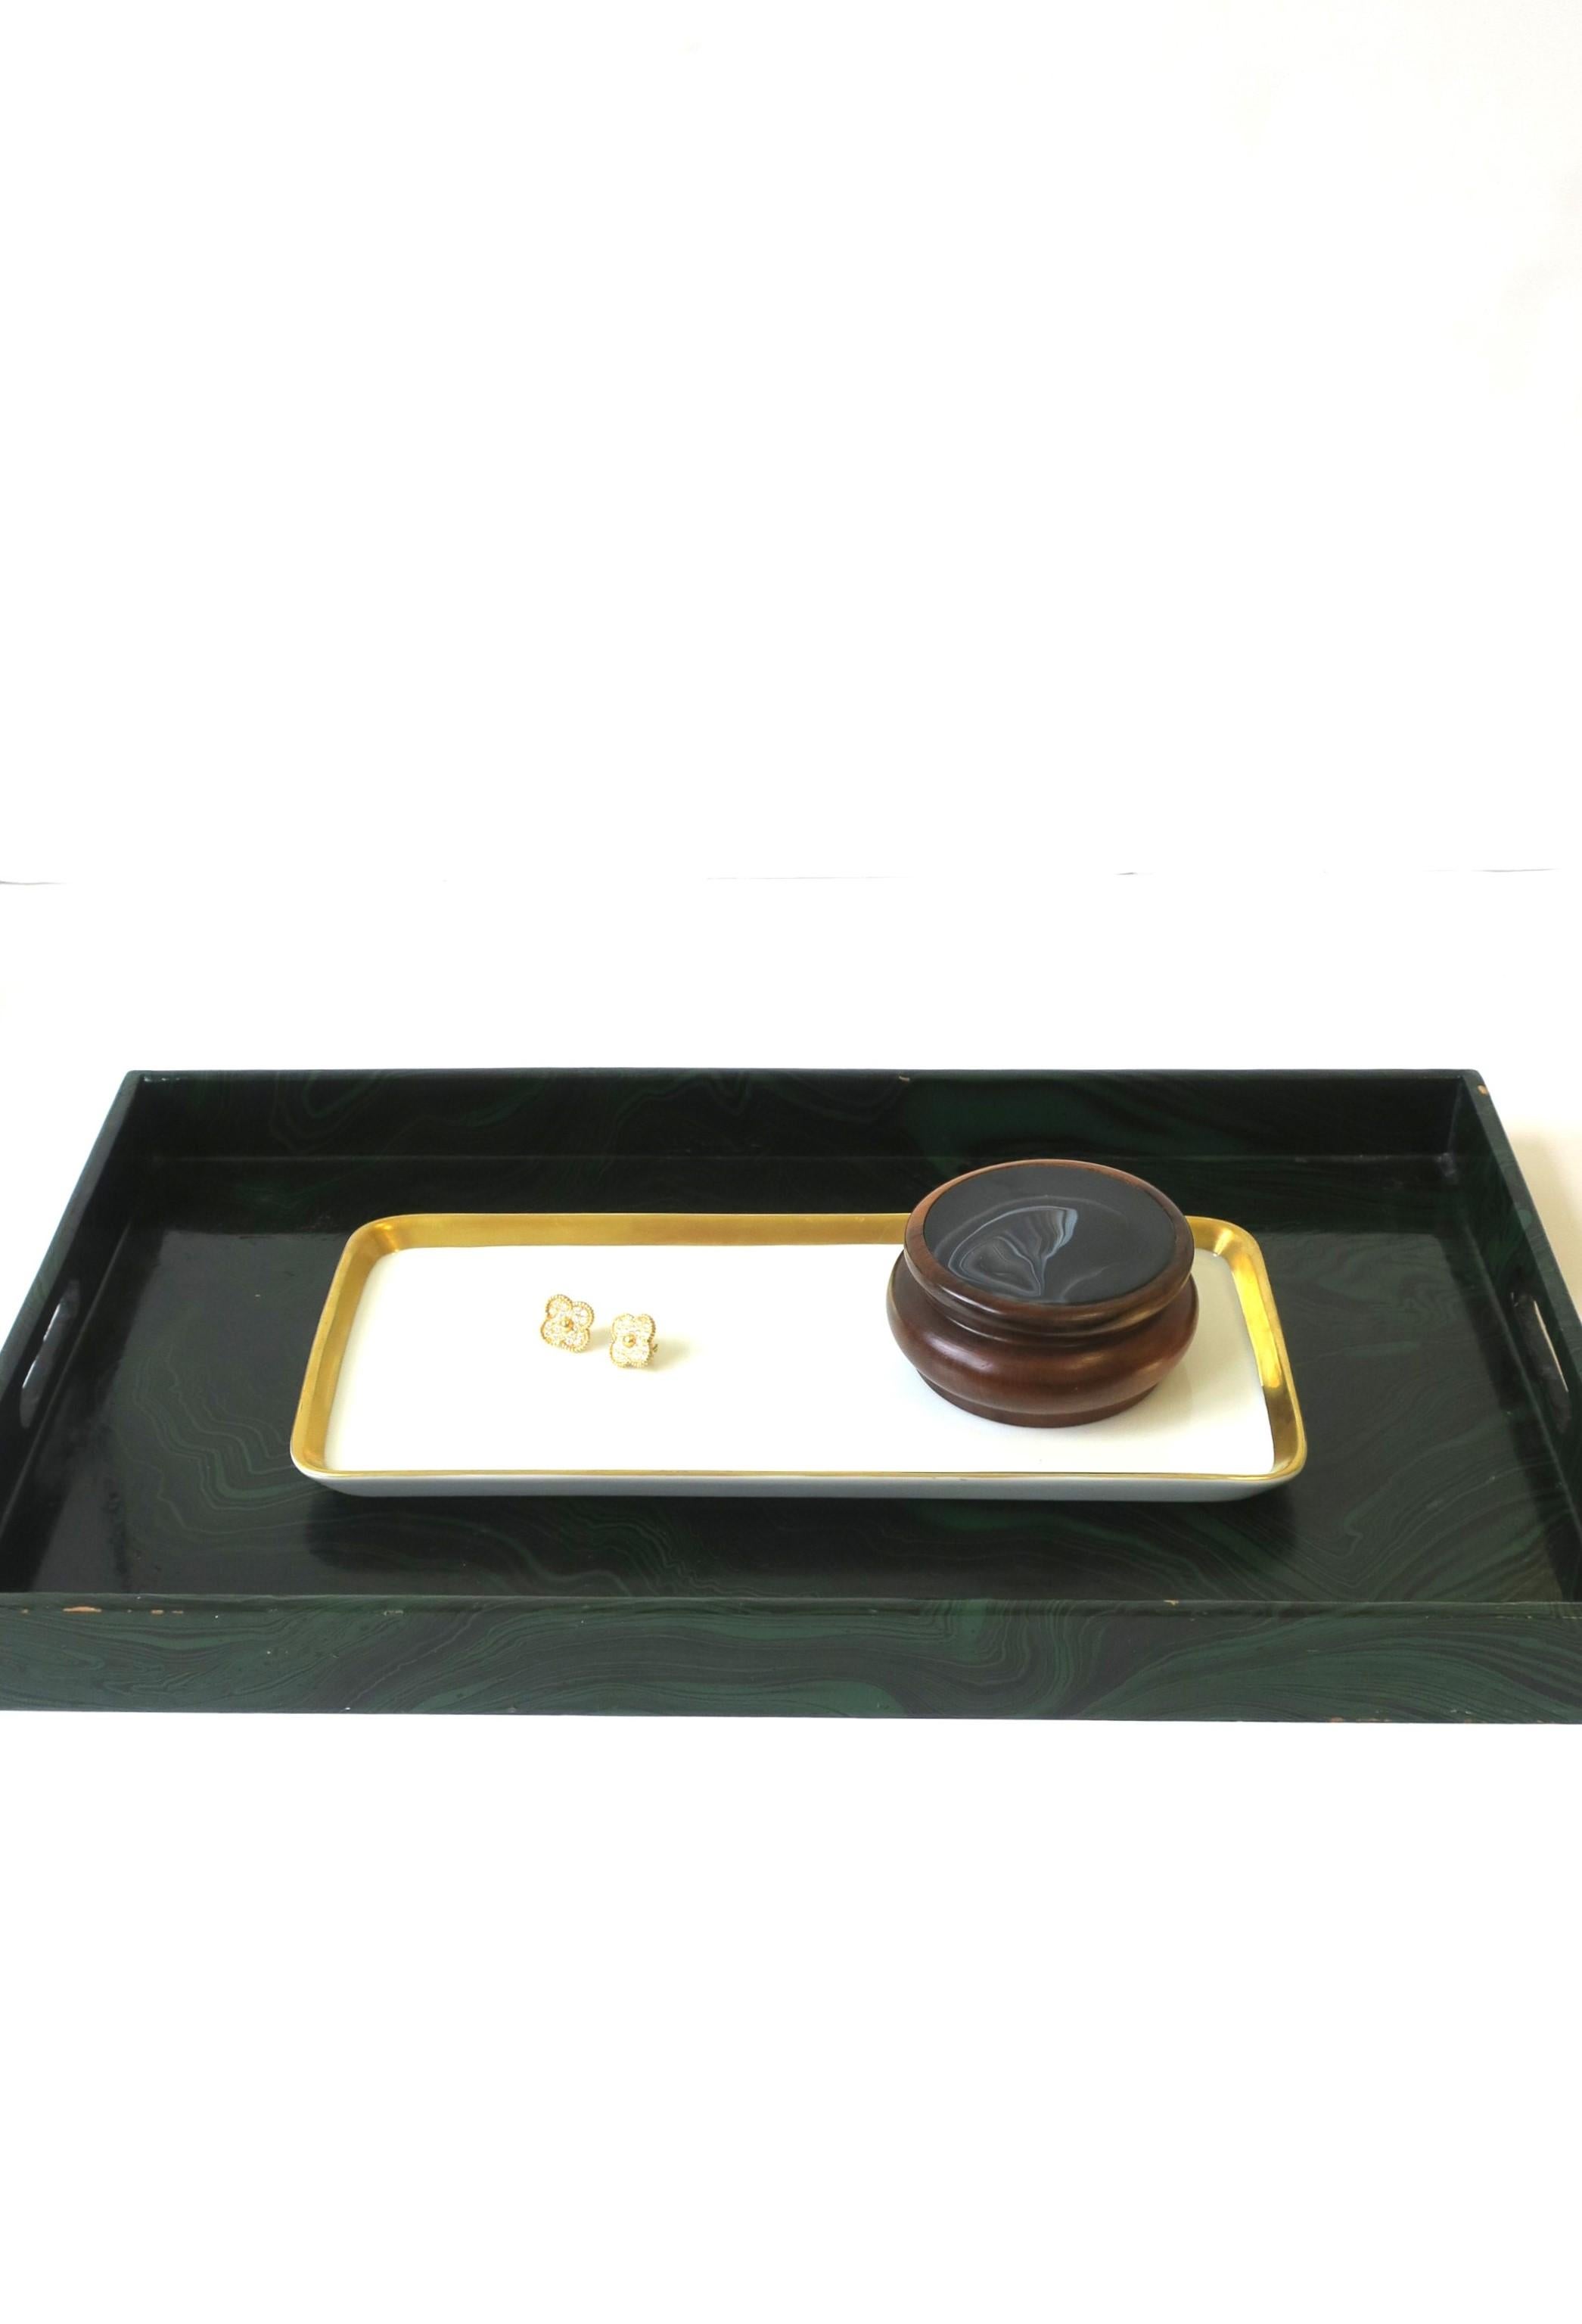 Brazilian Wood and Black Agate Onyx Round Box, Brazil 1980s For Sale 3